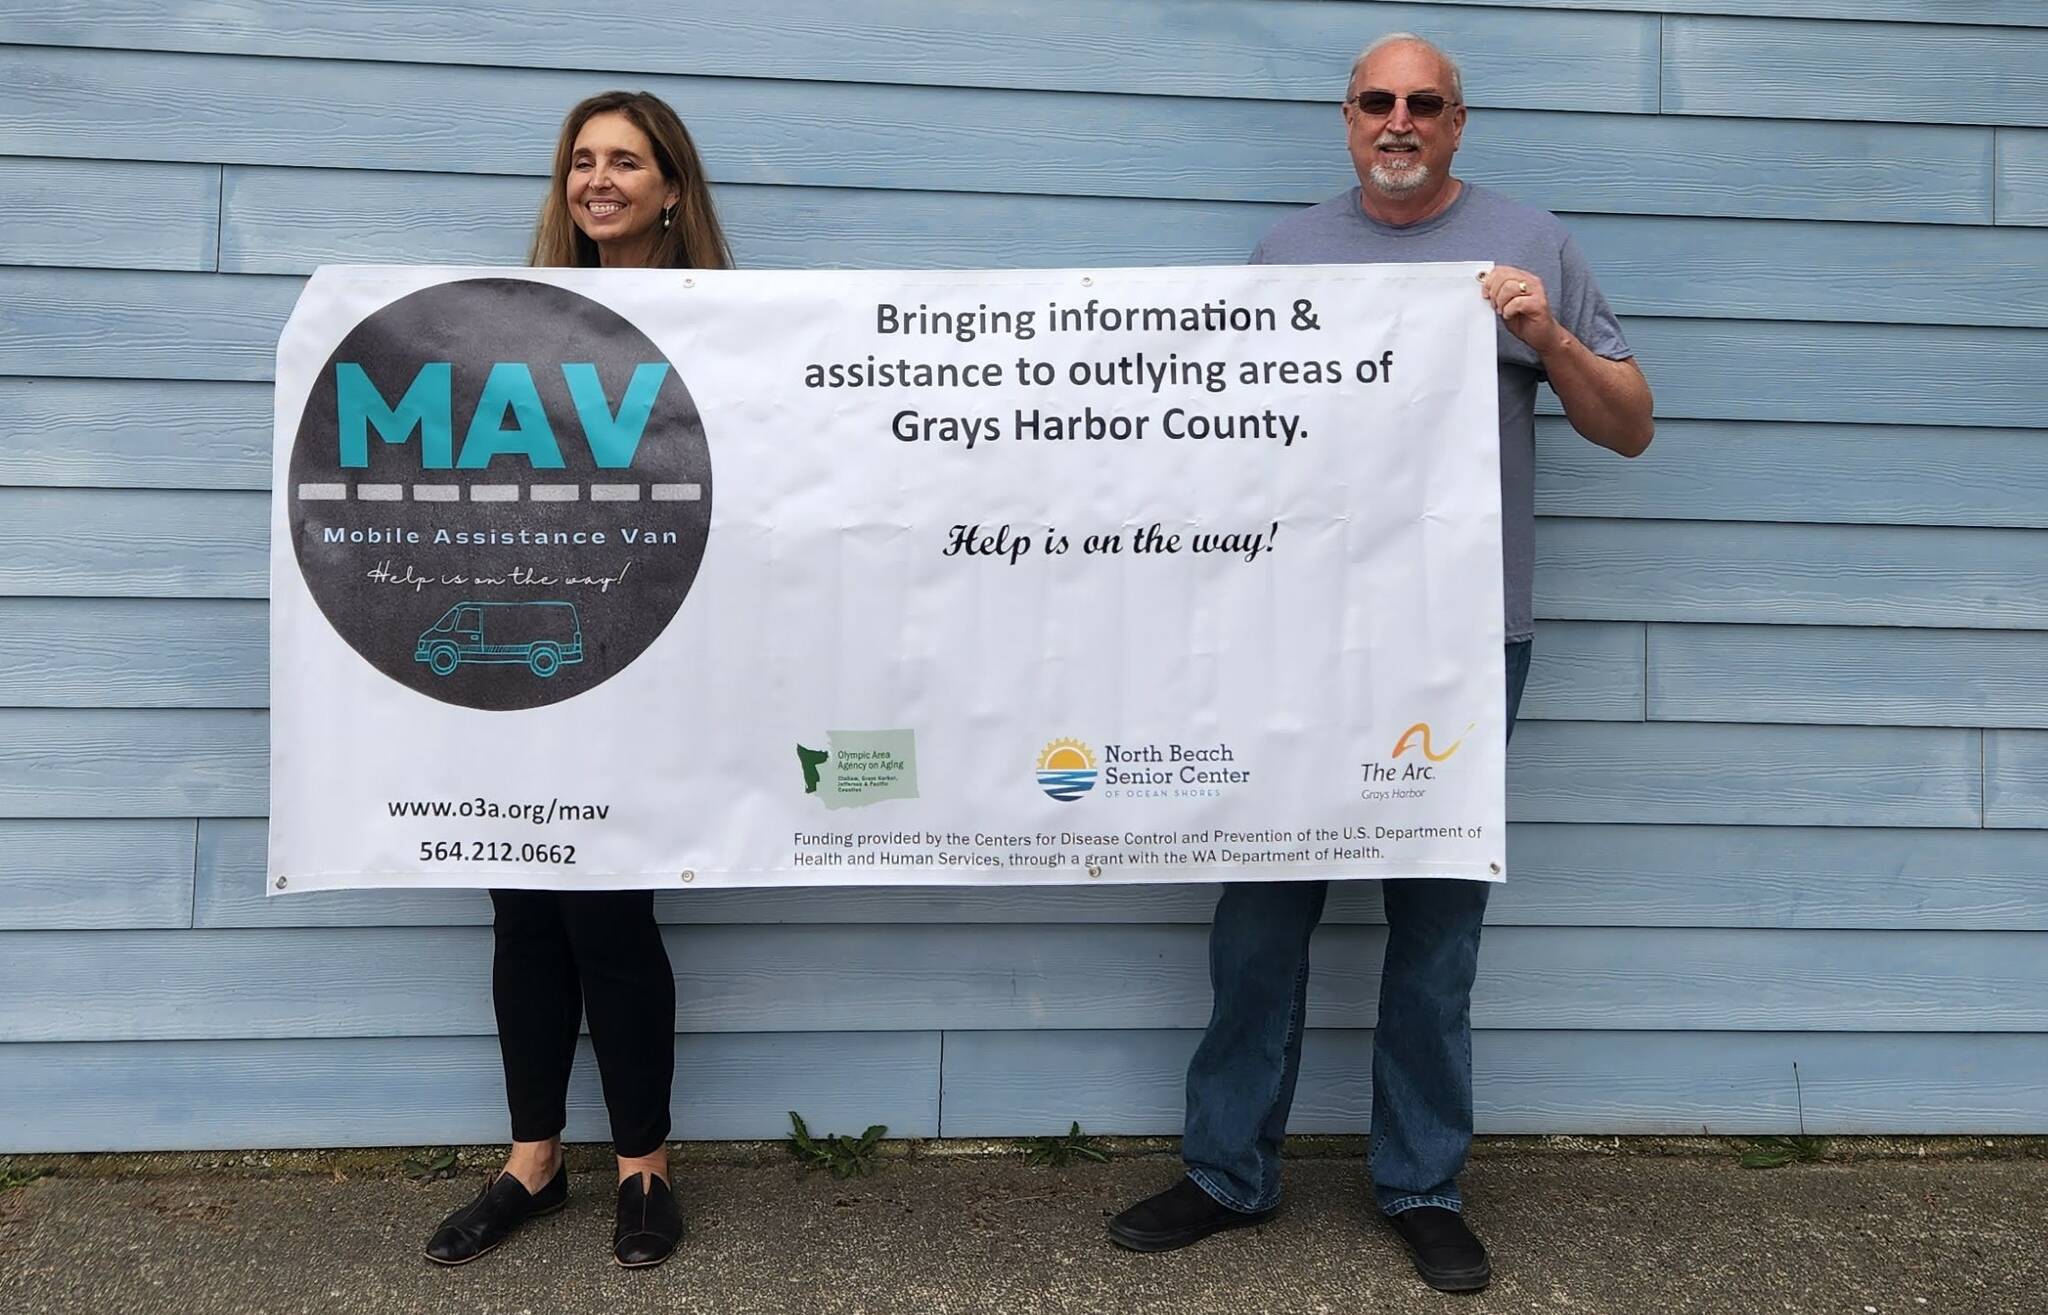 (Courtesy of Michelle Fogus) Jeff Moyer, right, executive director of the North Beach Senior Center, and Laura Cepoi, executive director of the Olympic Area Agency on Aging, display the banner for the new MAV mobile service project.